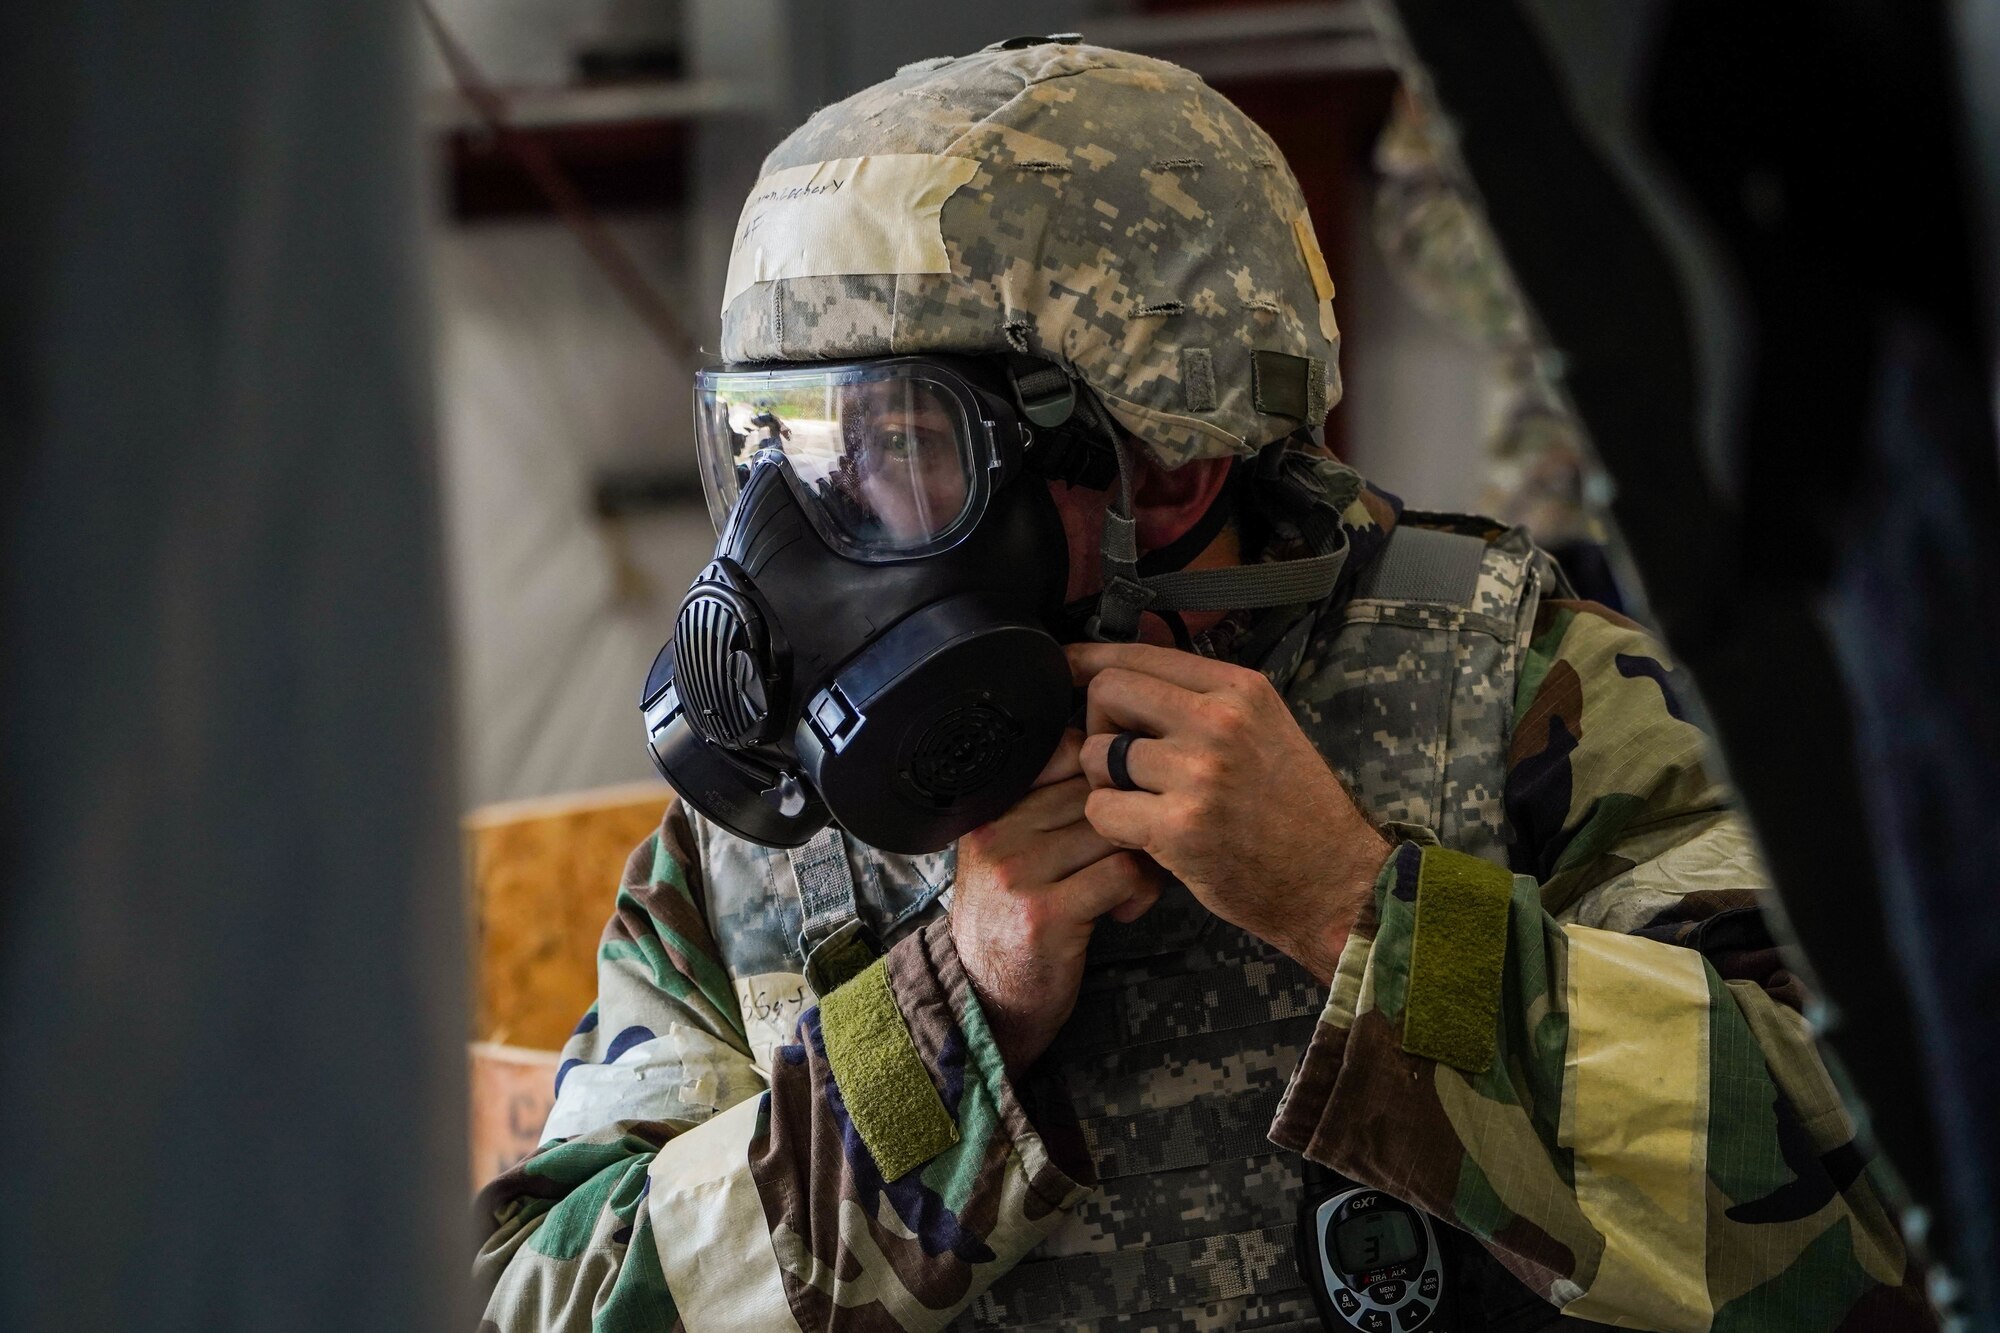 Staff Sgt. Zachary Stutzman, 647th Civil Engineer Squadron electrical journeyman, dons Mission-Oriented Protective Posture response gear during Exercise TROPIC FURY at Joint Base Pearl Harbor-Hickam, Hawaii, March 8, 2022. MOPP gear protects against chemical agents during chemical, biological and nuclear scenarios and protects Airmen from harmful substances. (U.S. Air Force photo by Airman 1st Class Makensie Cooper)